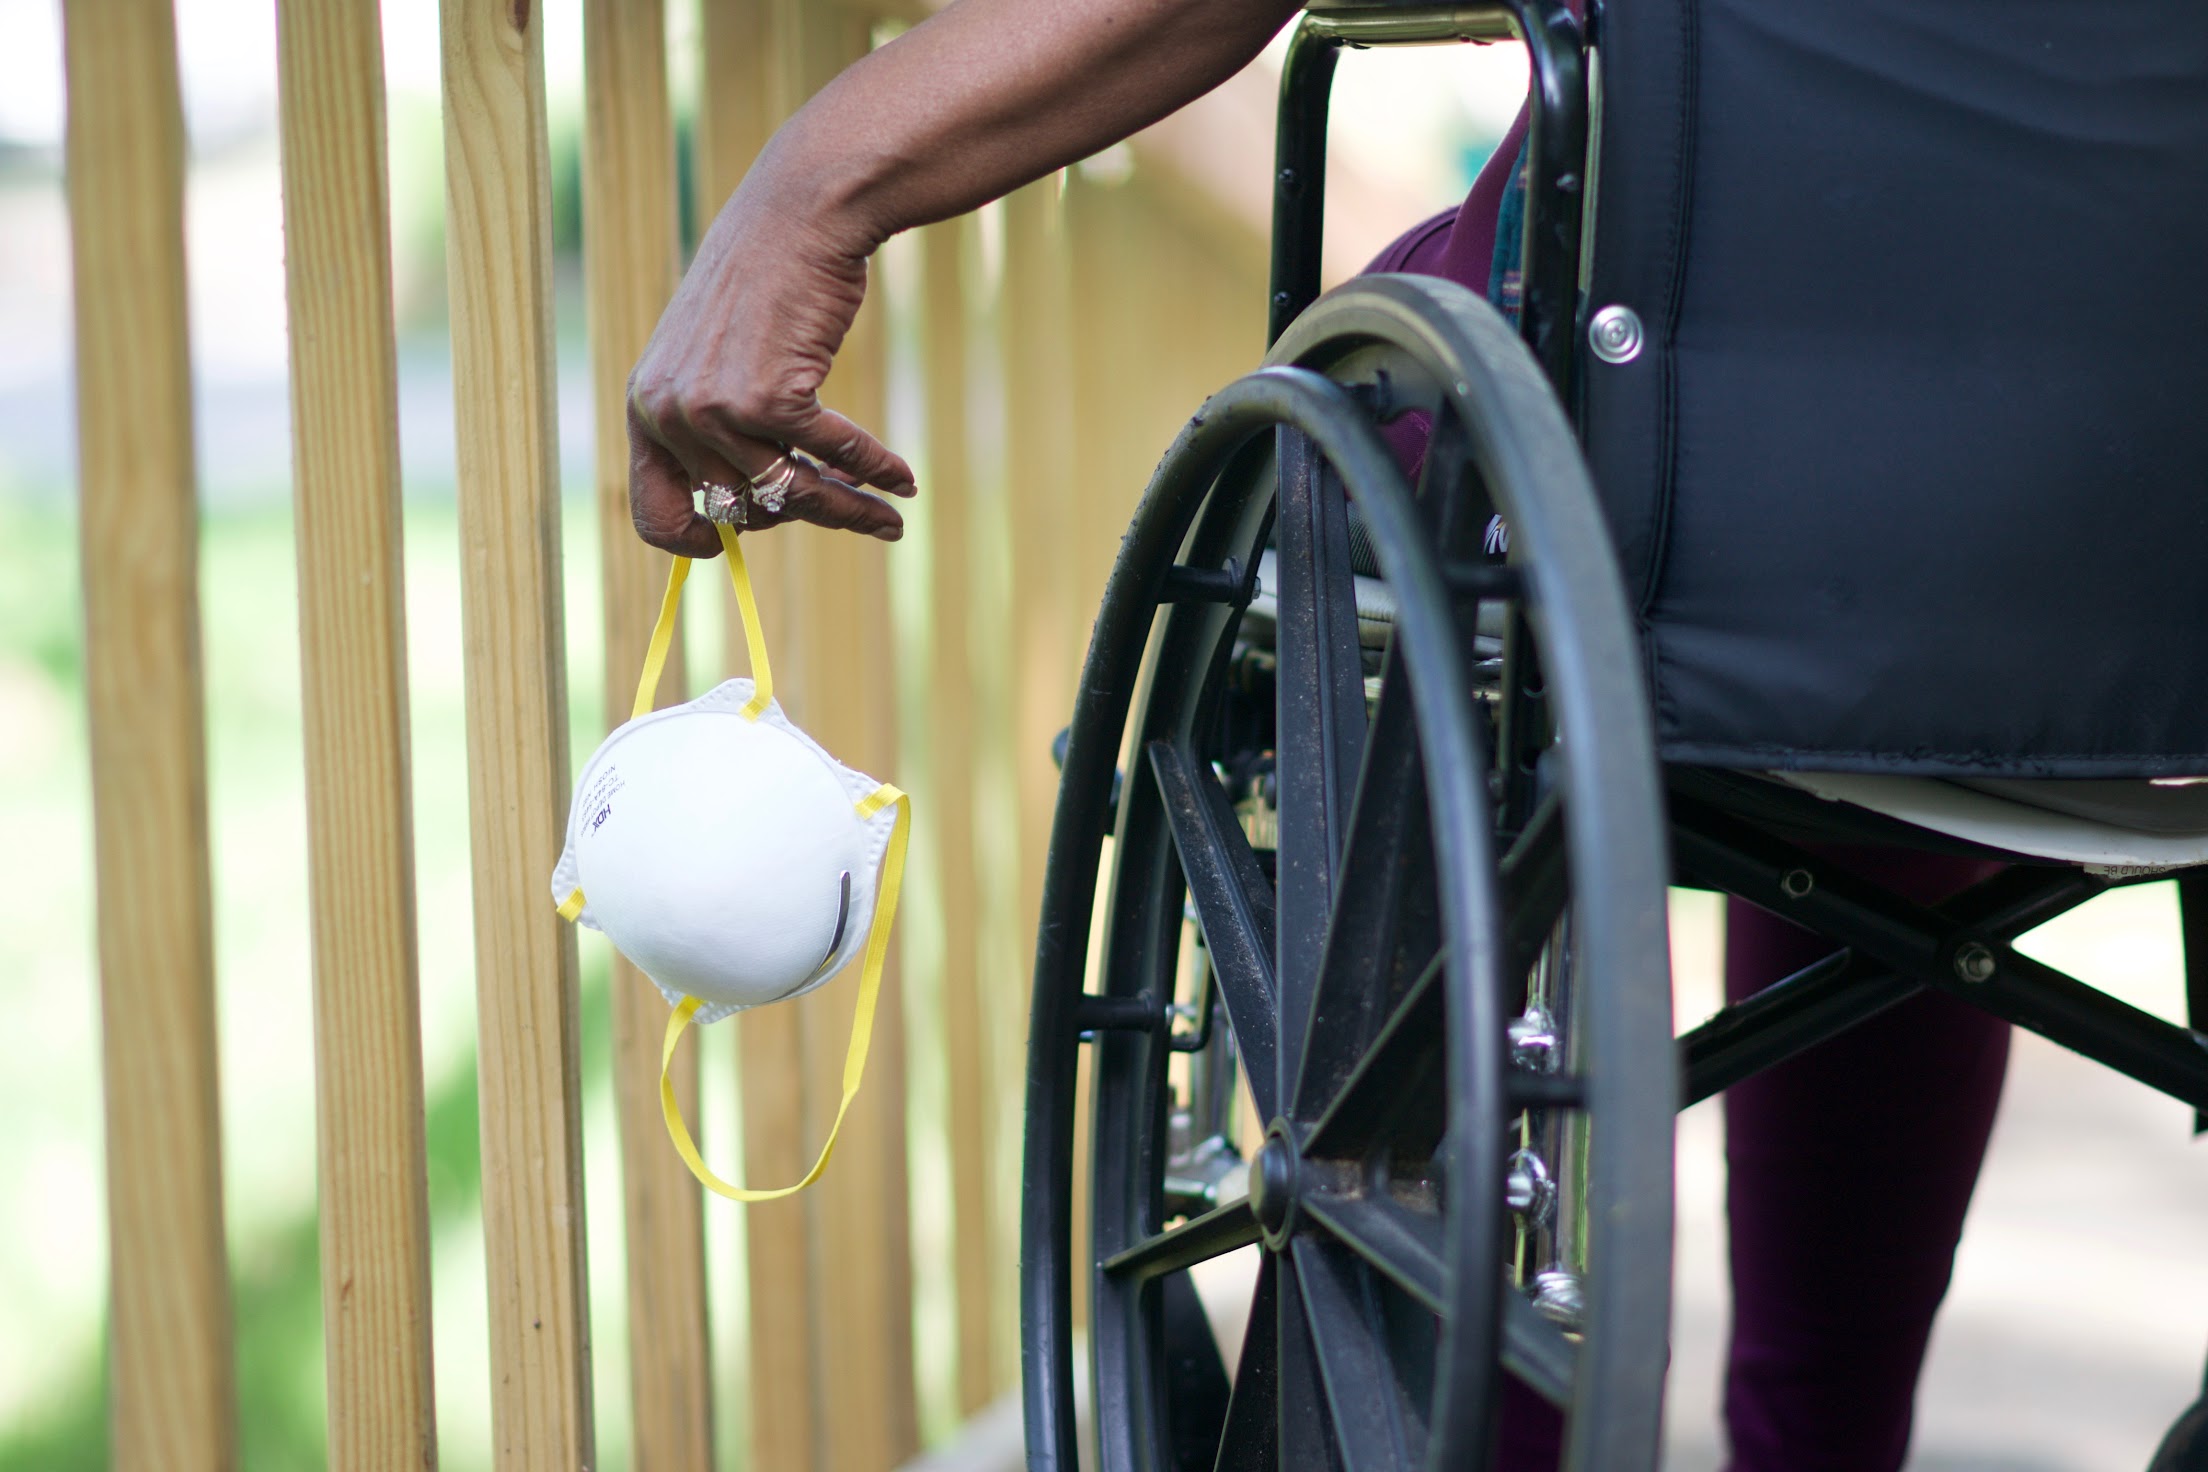 UN expert calls for transformation of support and services for persons with disabilities